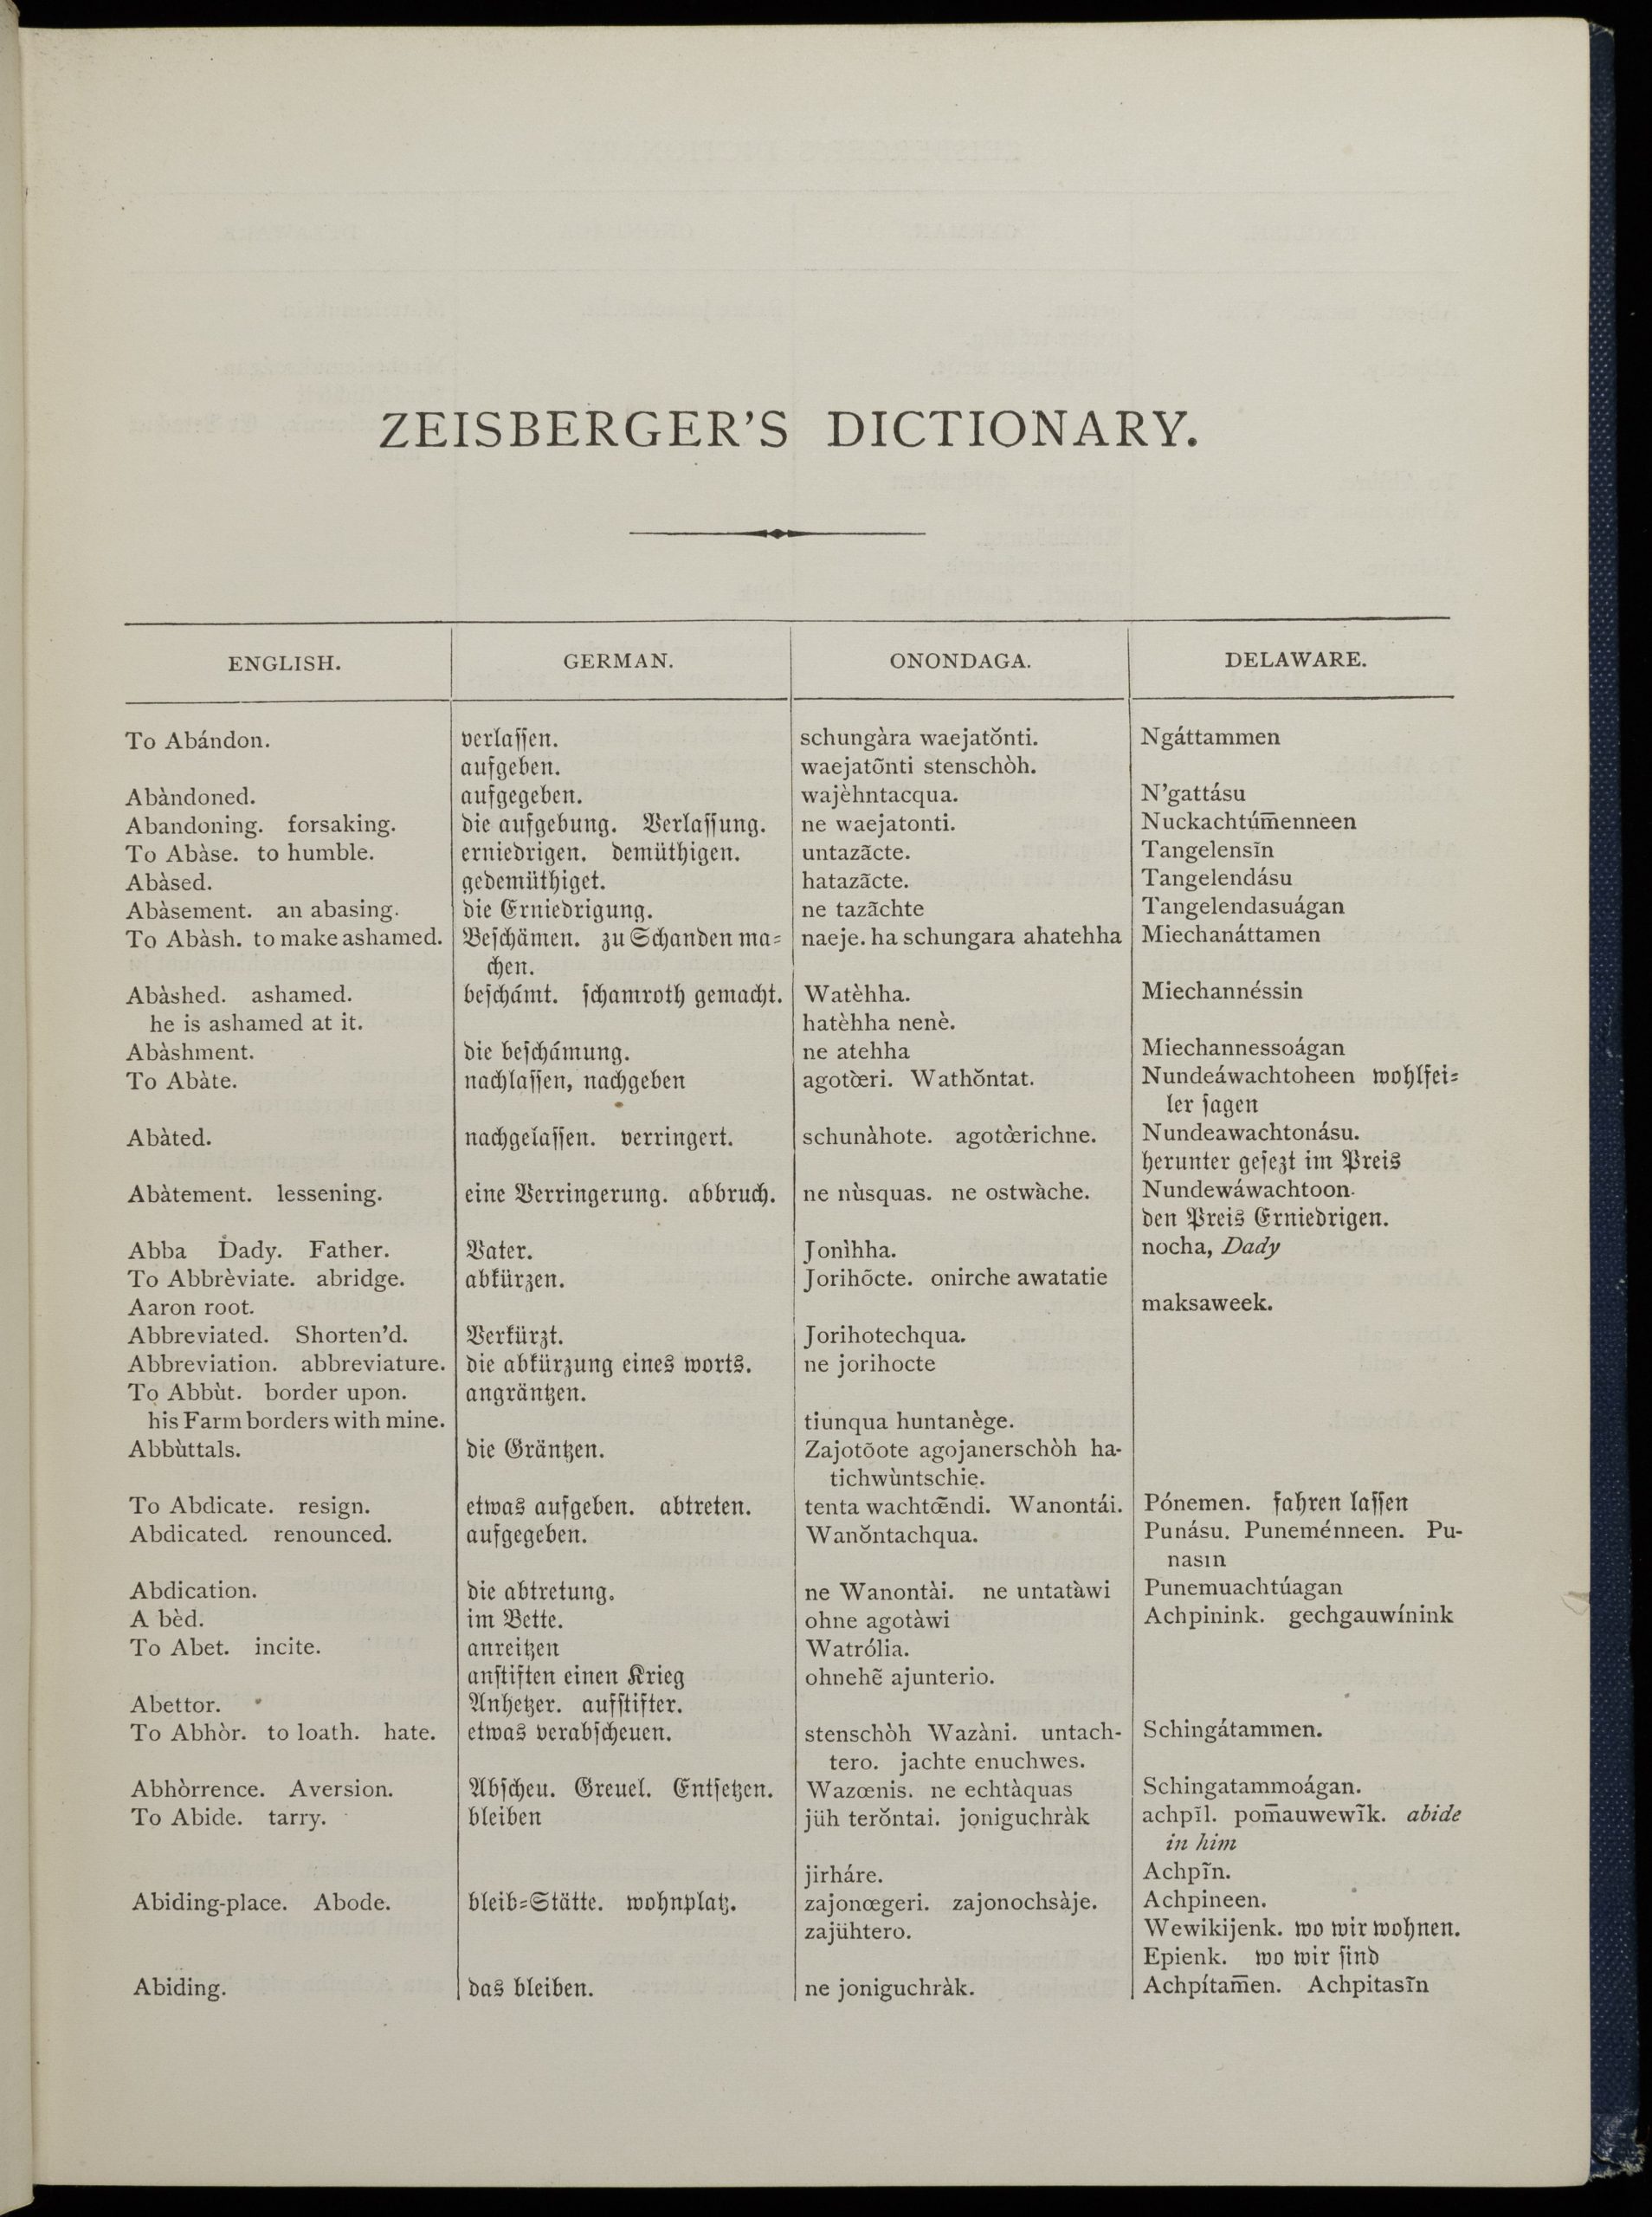 Printed page of a dictionary. At the top is the title, “Zeisberger’s Dictionary.” Below this is a decorative line and then four columns of text, which can be read horizontally with the same word translated into four languages. Left to right these are, English, German, Onondaga, and Delaware. Words in the German column are printed in Fraktur, the others in a ‘plain’ serif font.